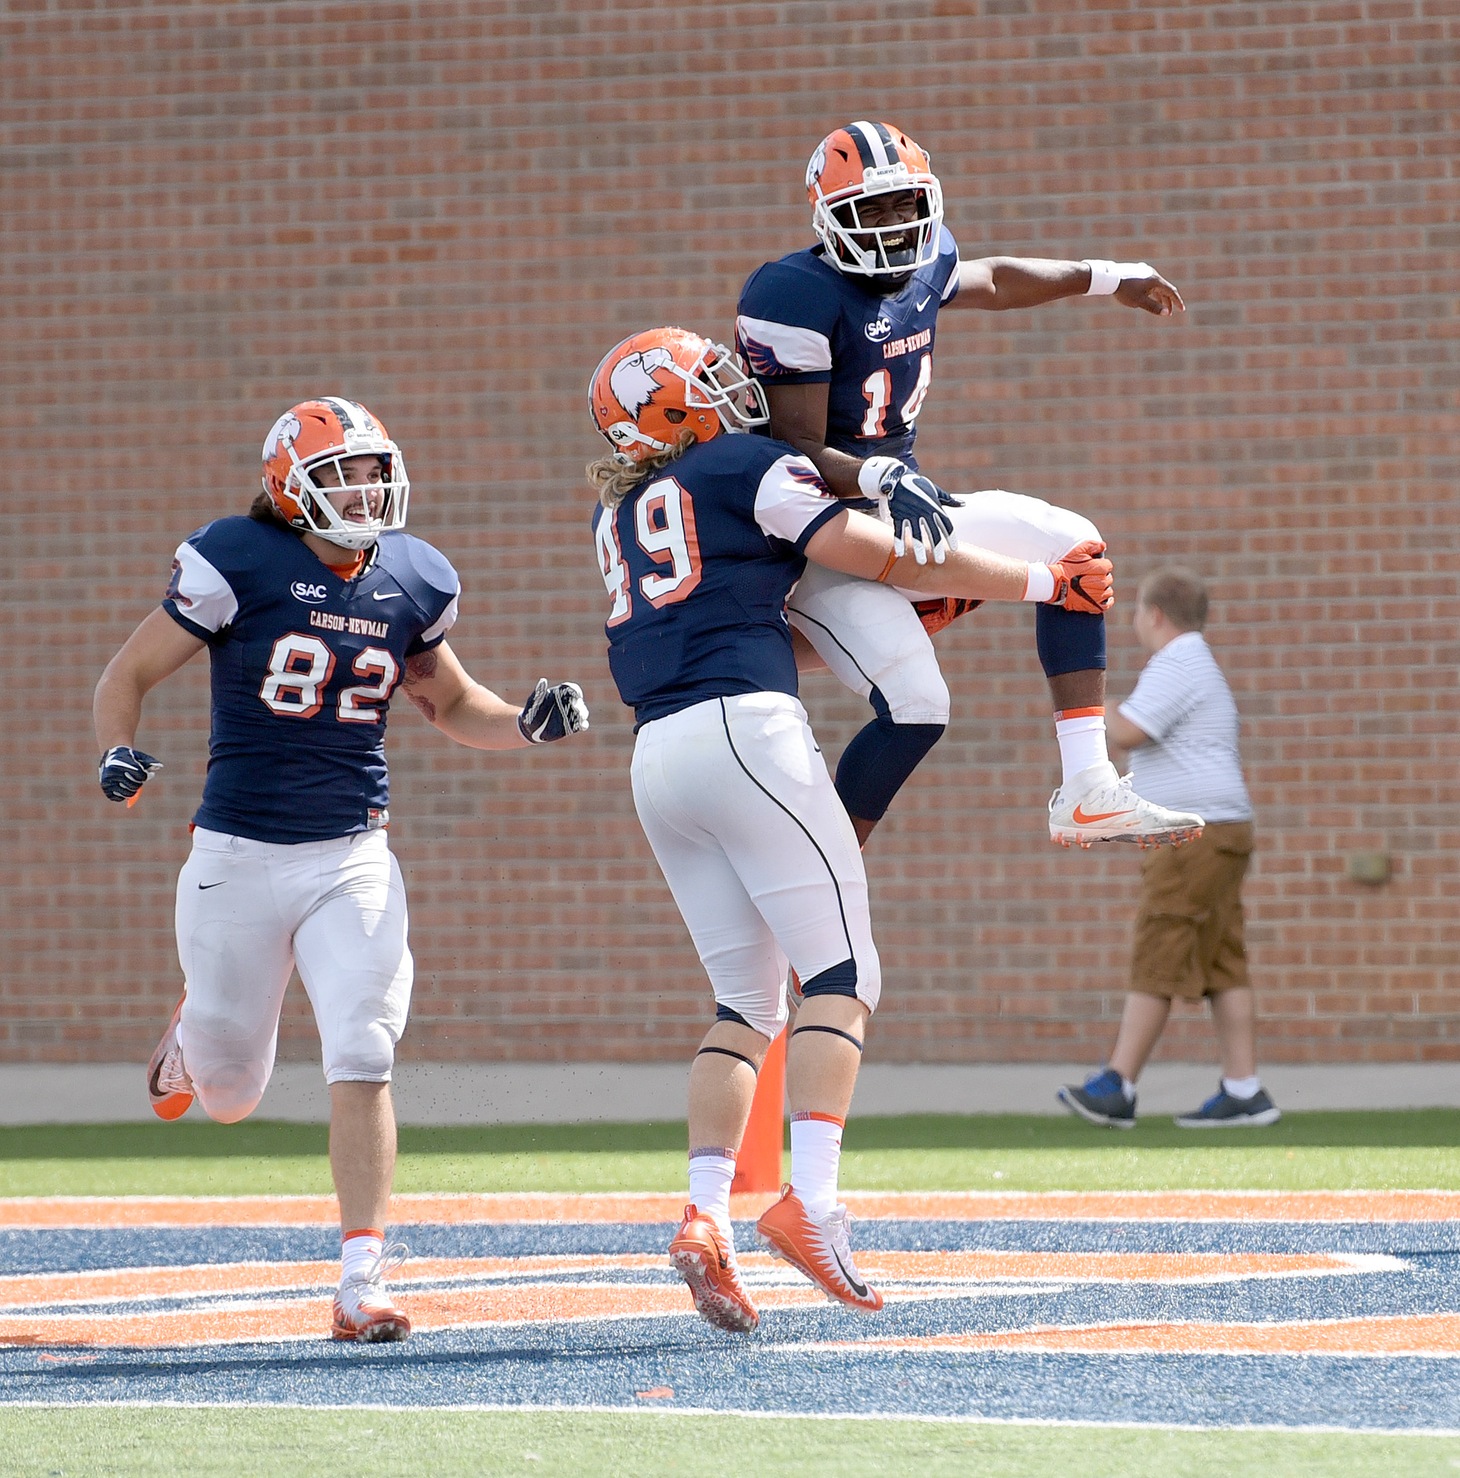 Eagles pound the ground in dominant 31-18 win over No. 23 Catawba